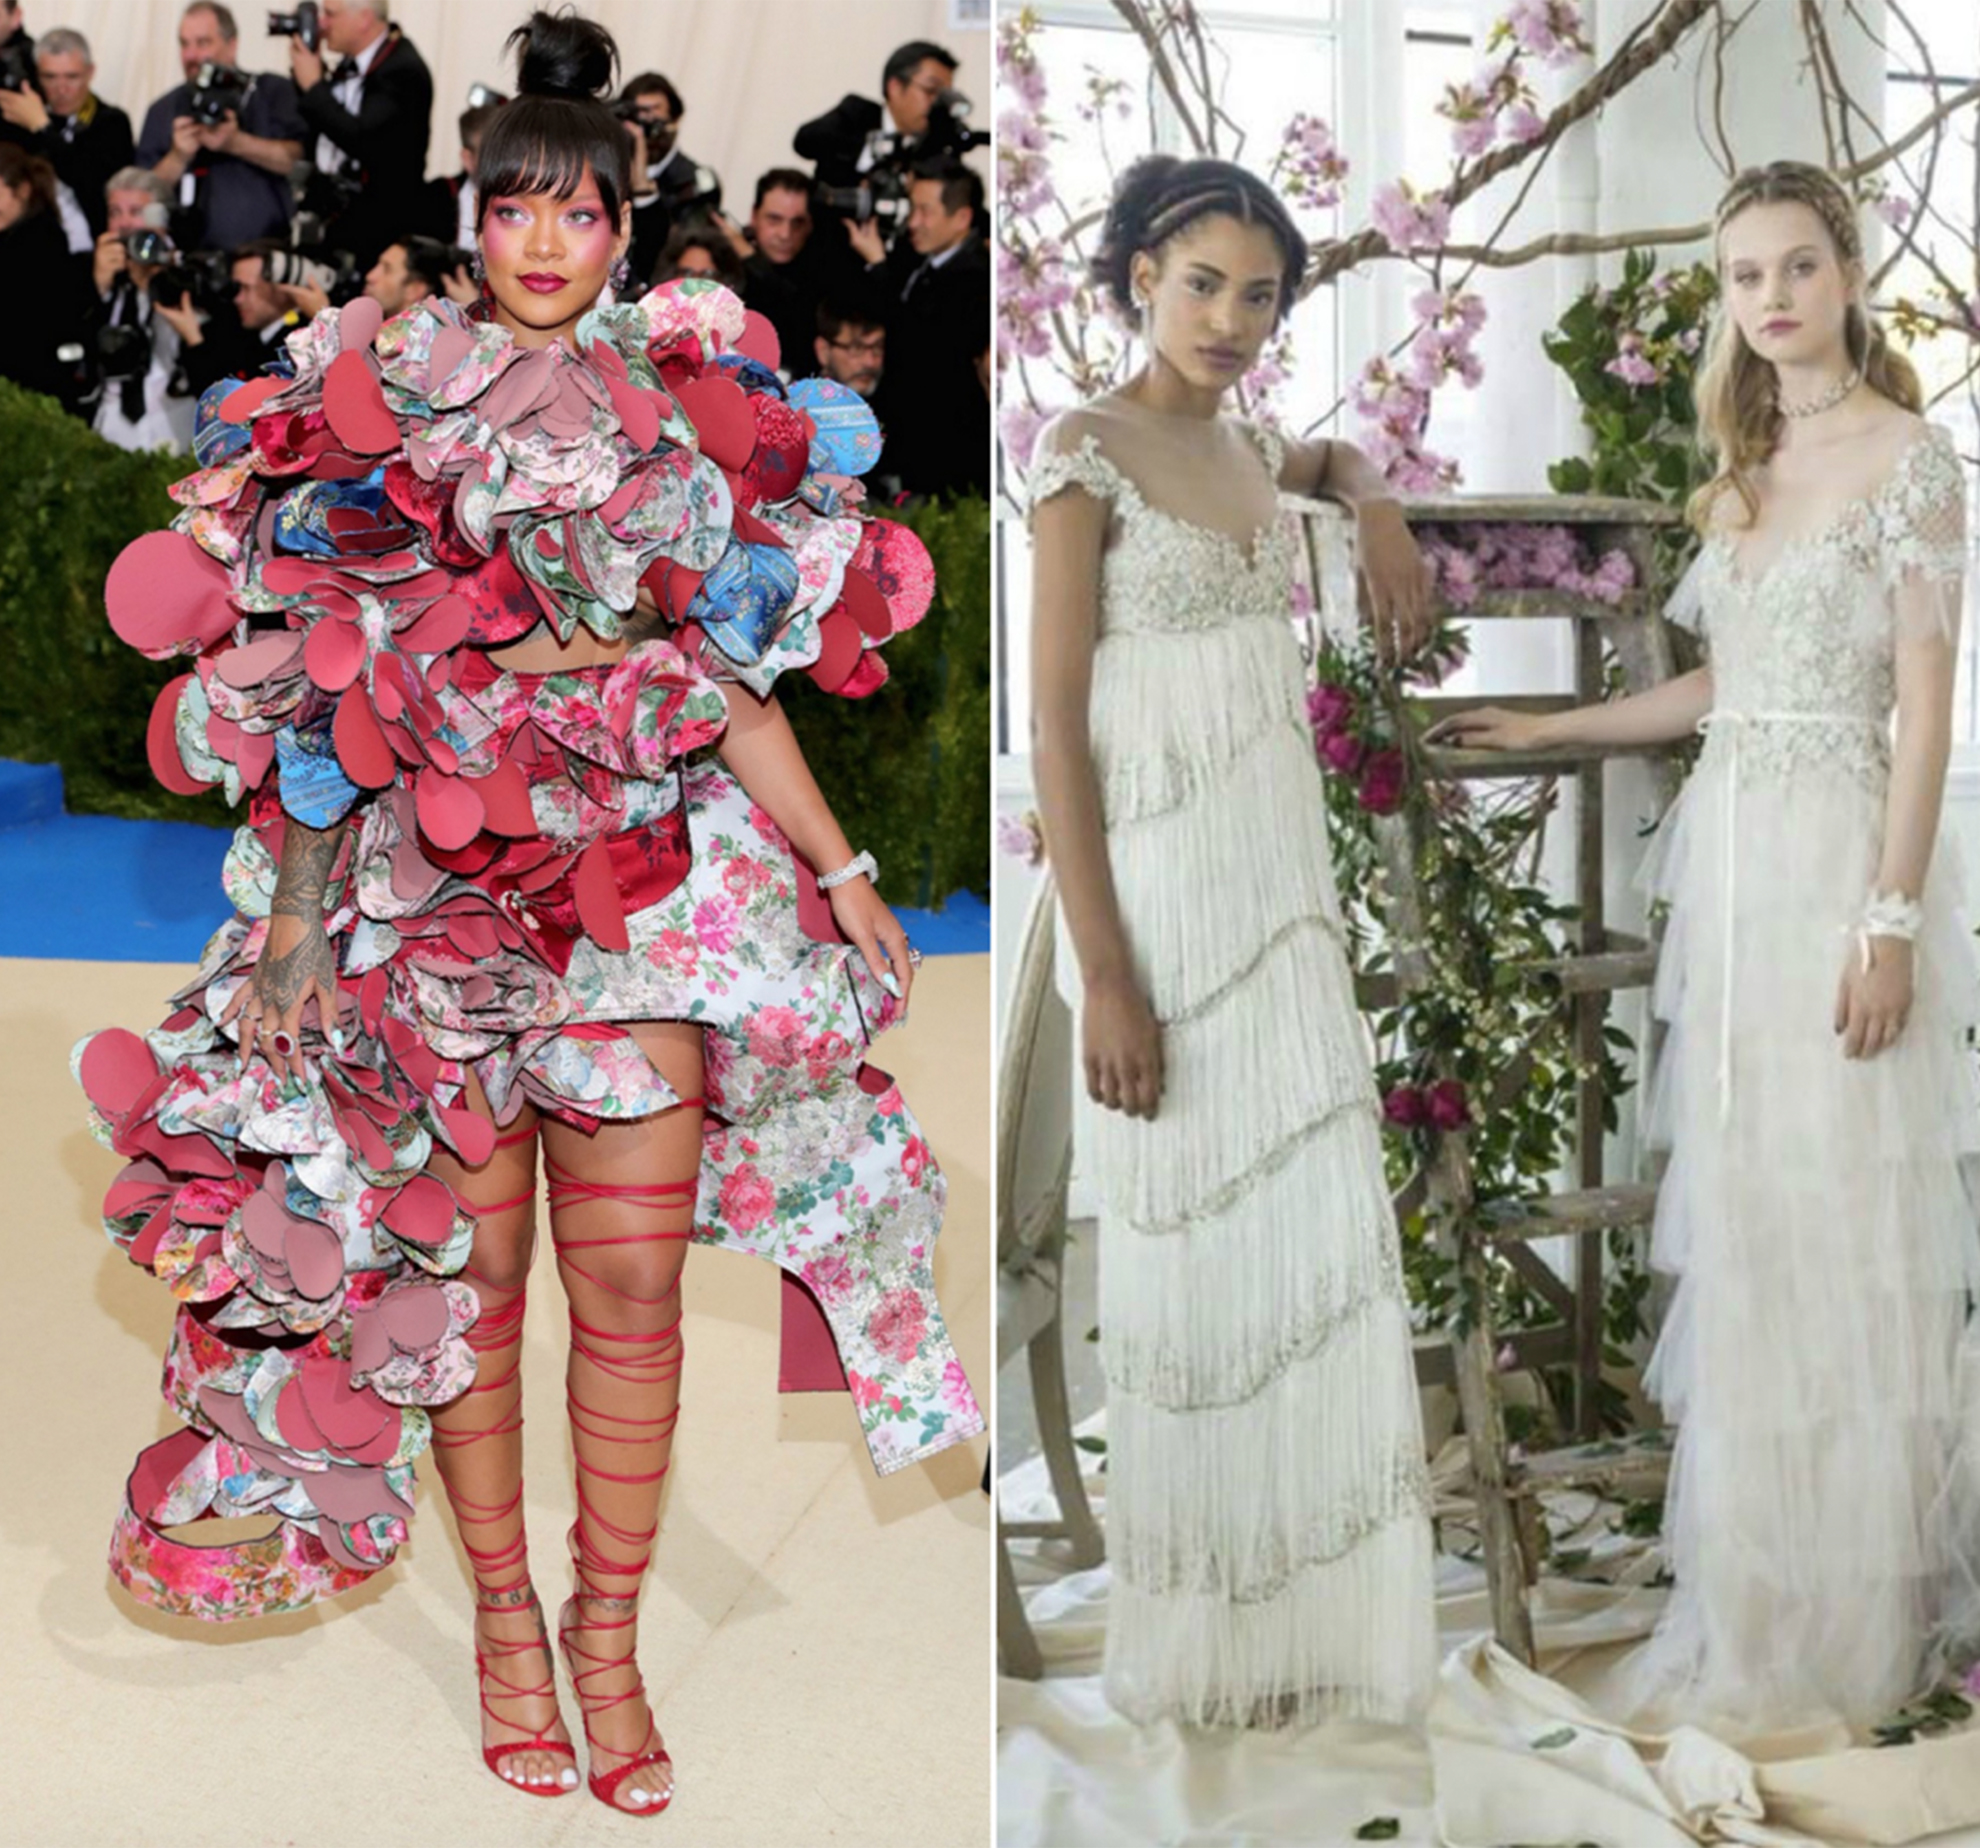 Dresses from the Met Gala which would inspire wedding dresses